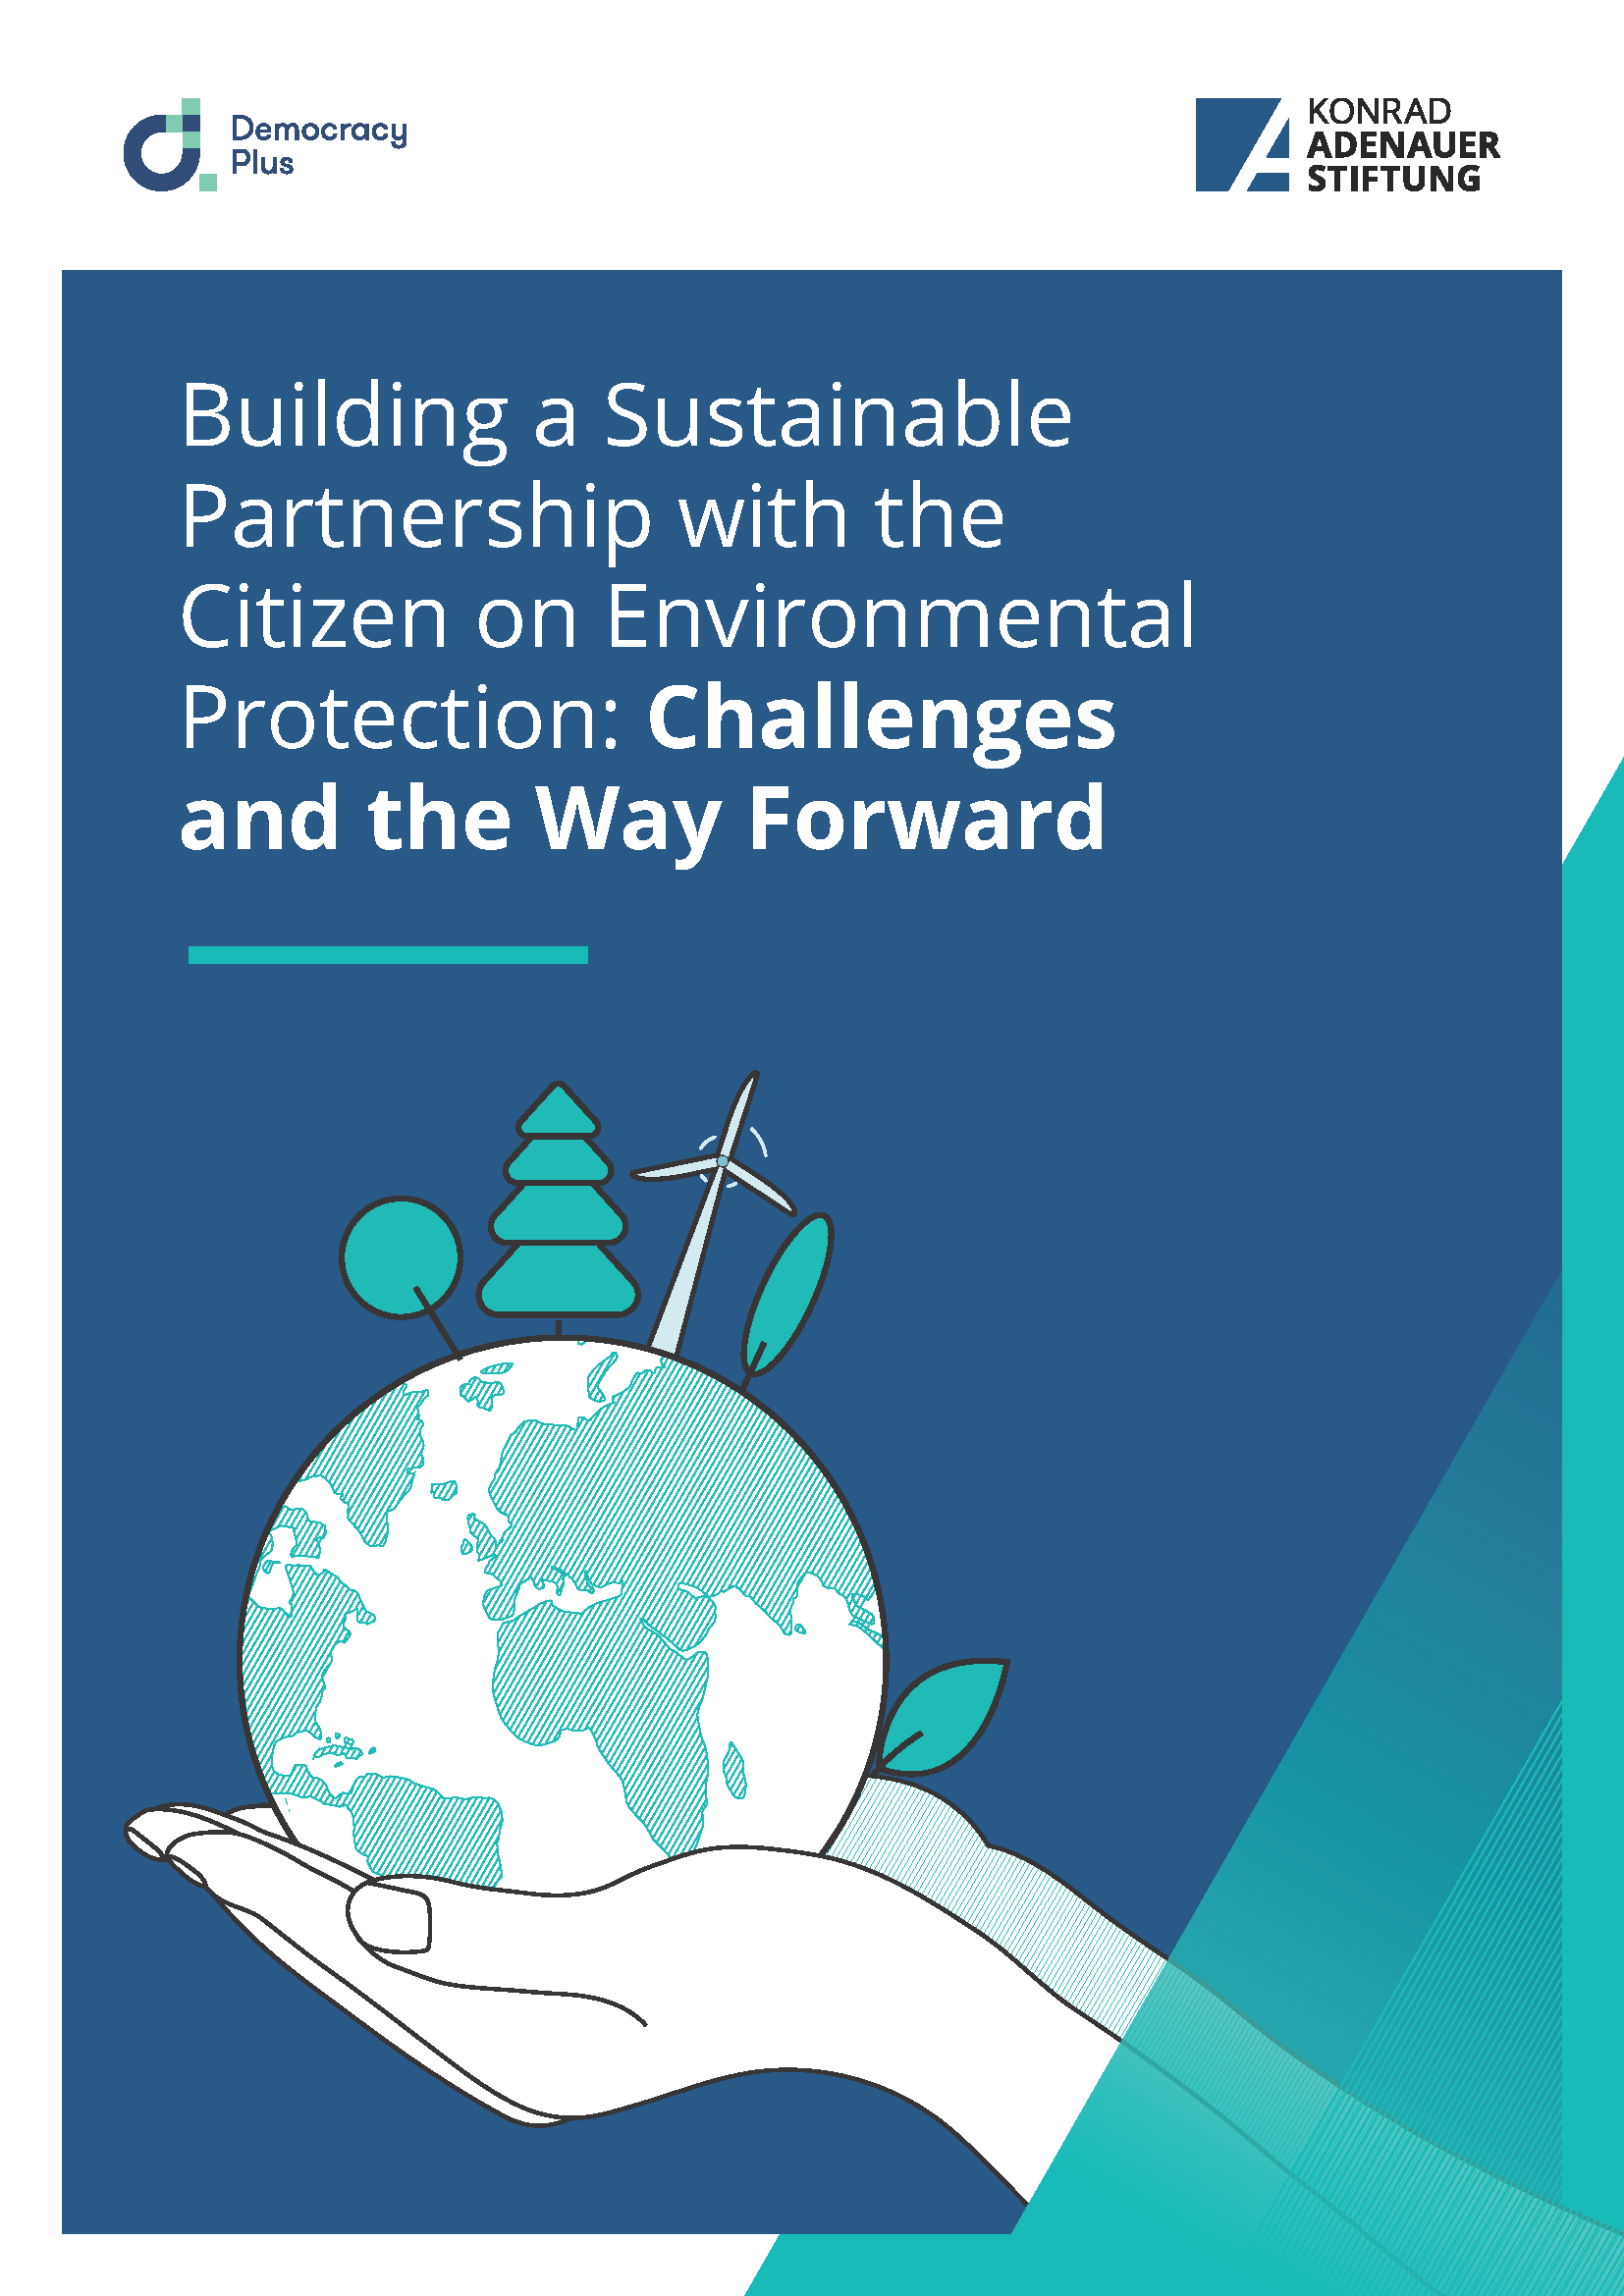 Building a Sustainable Partnership with the Citizen on Environmental Protection: Challenges and the Way Forward